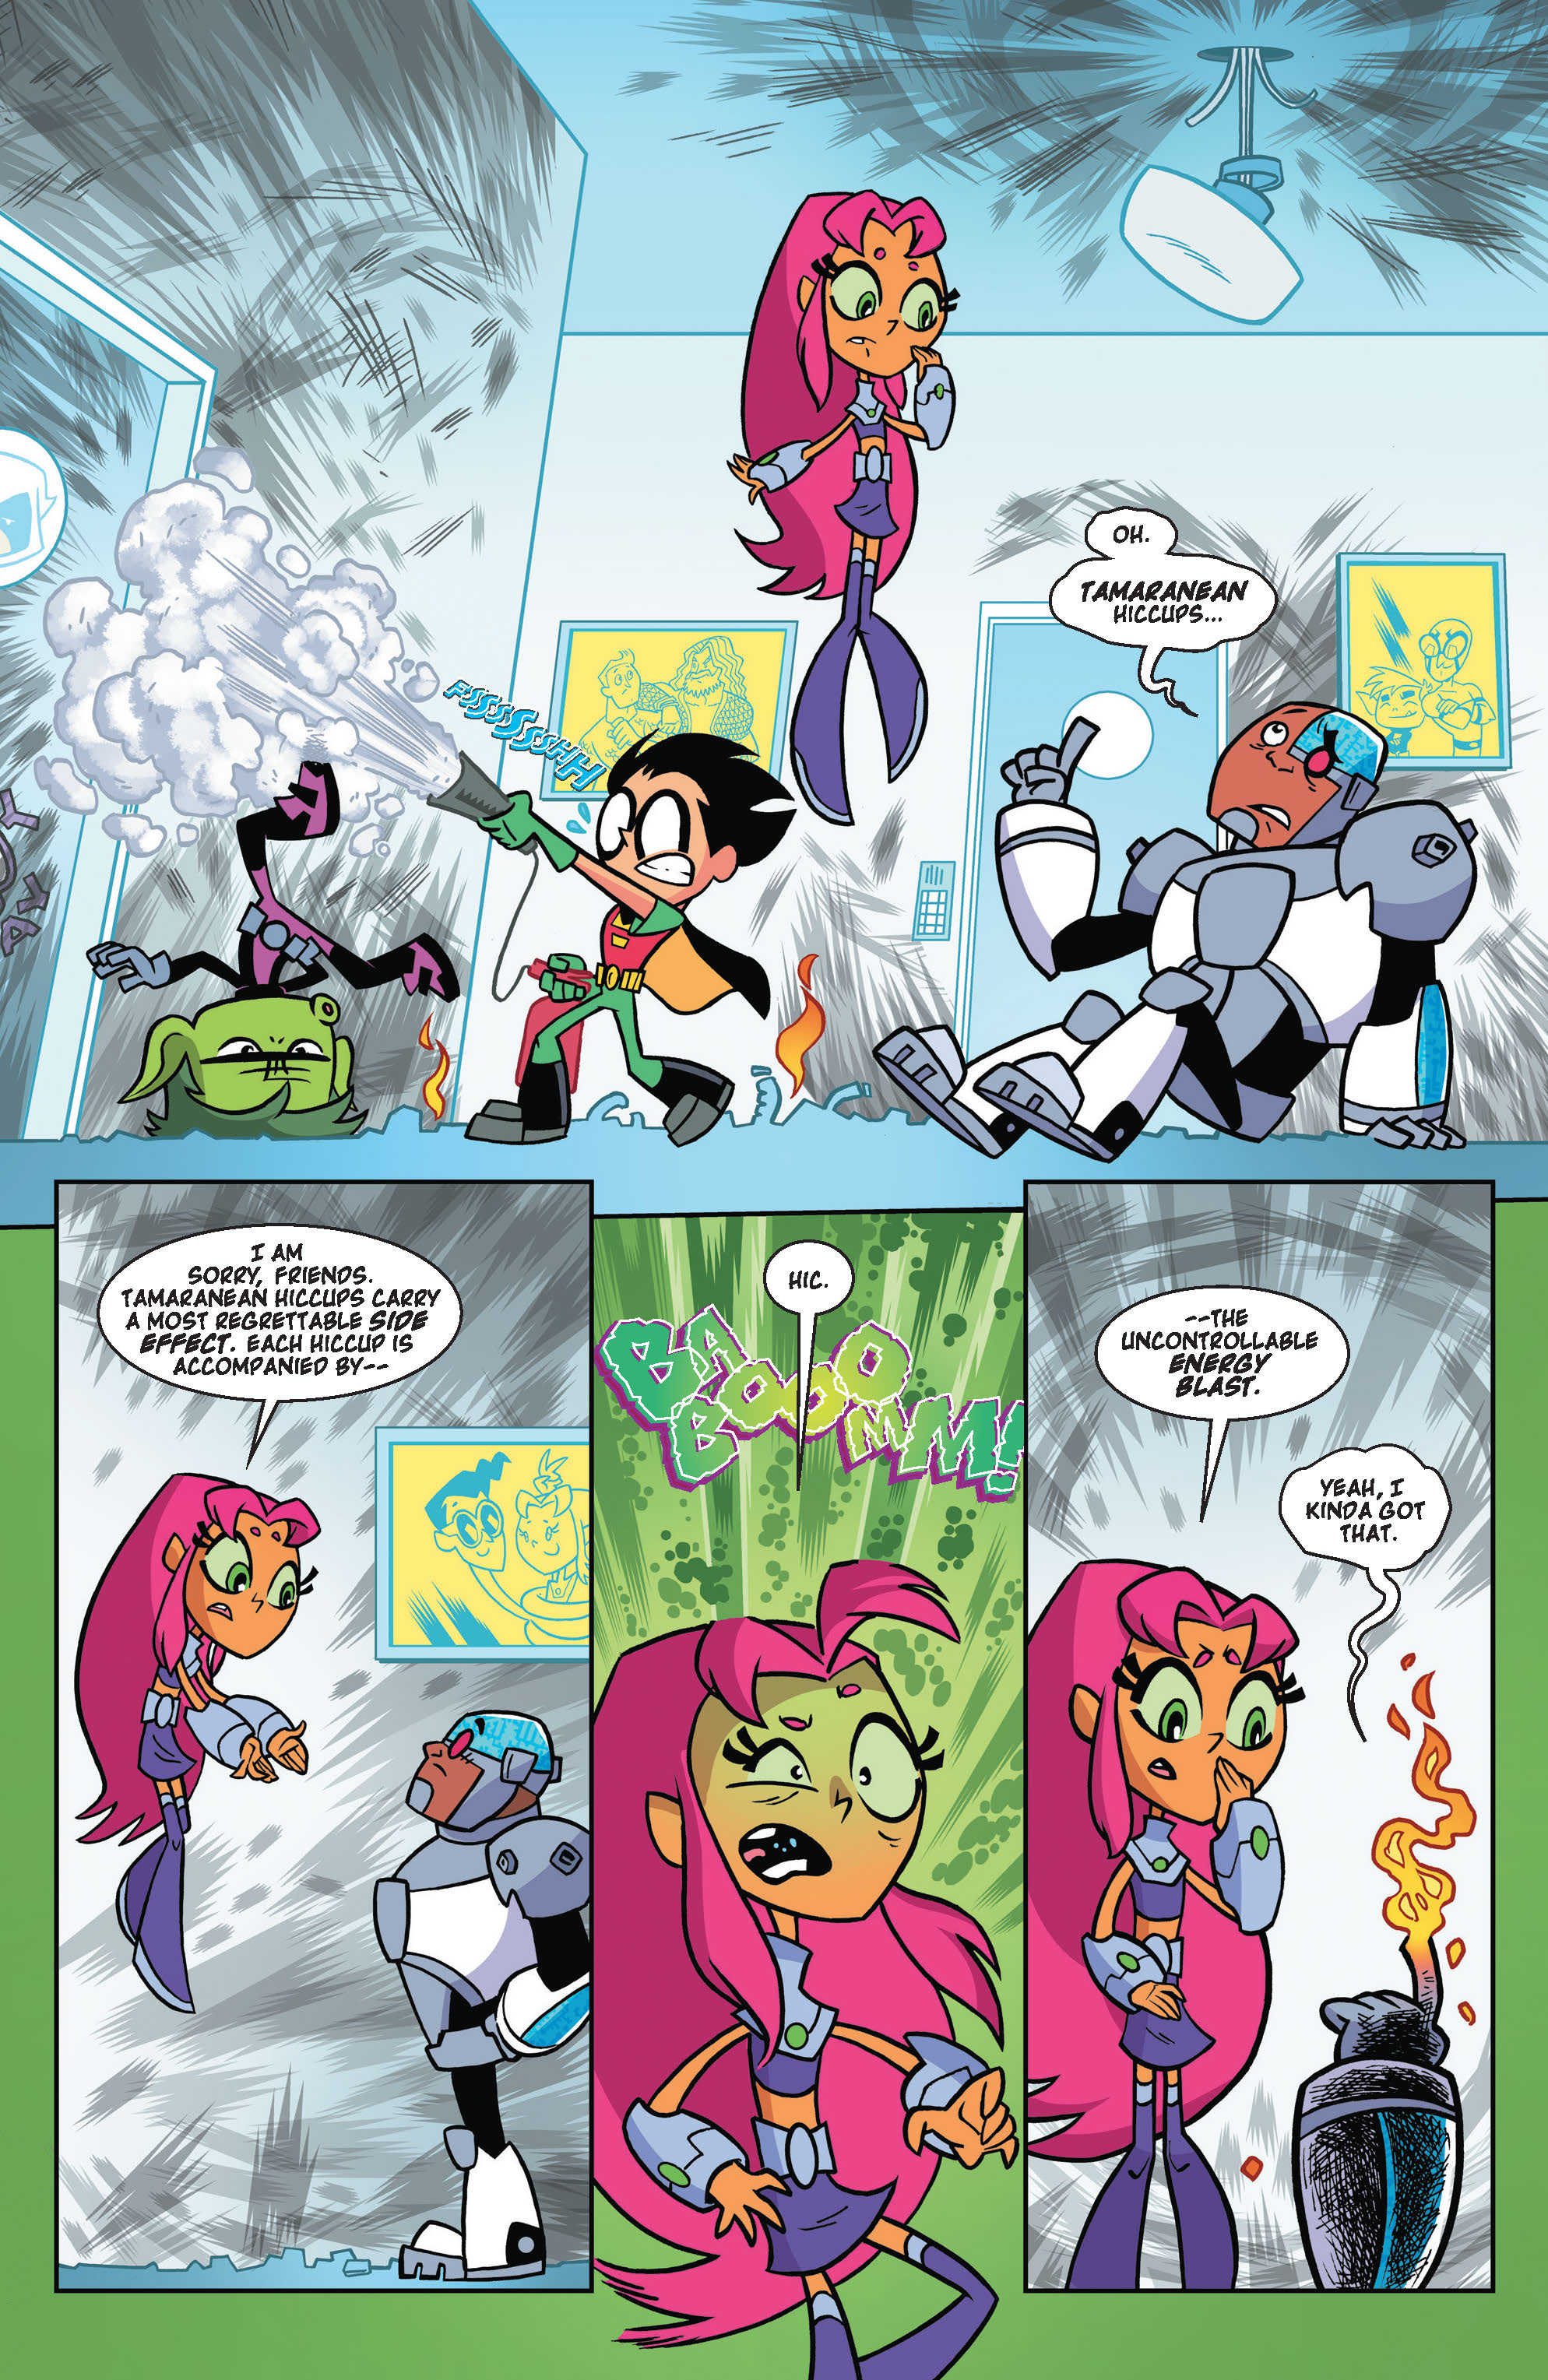 Teen Titans Go!: Booyah! (2020-): Chapter 1 - Page 4